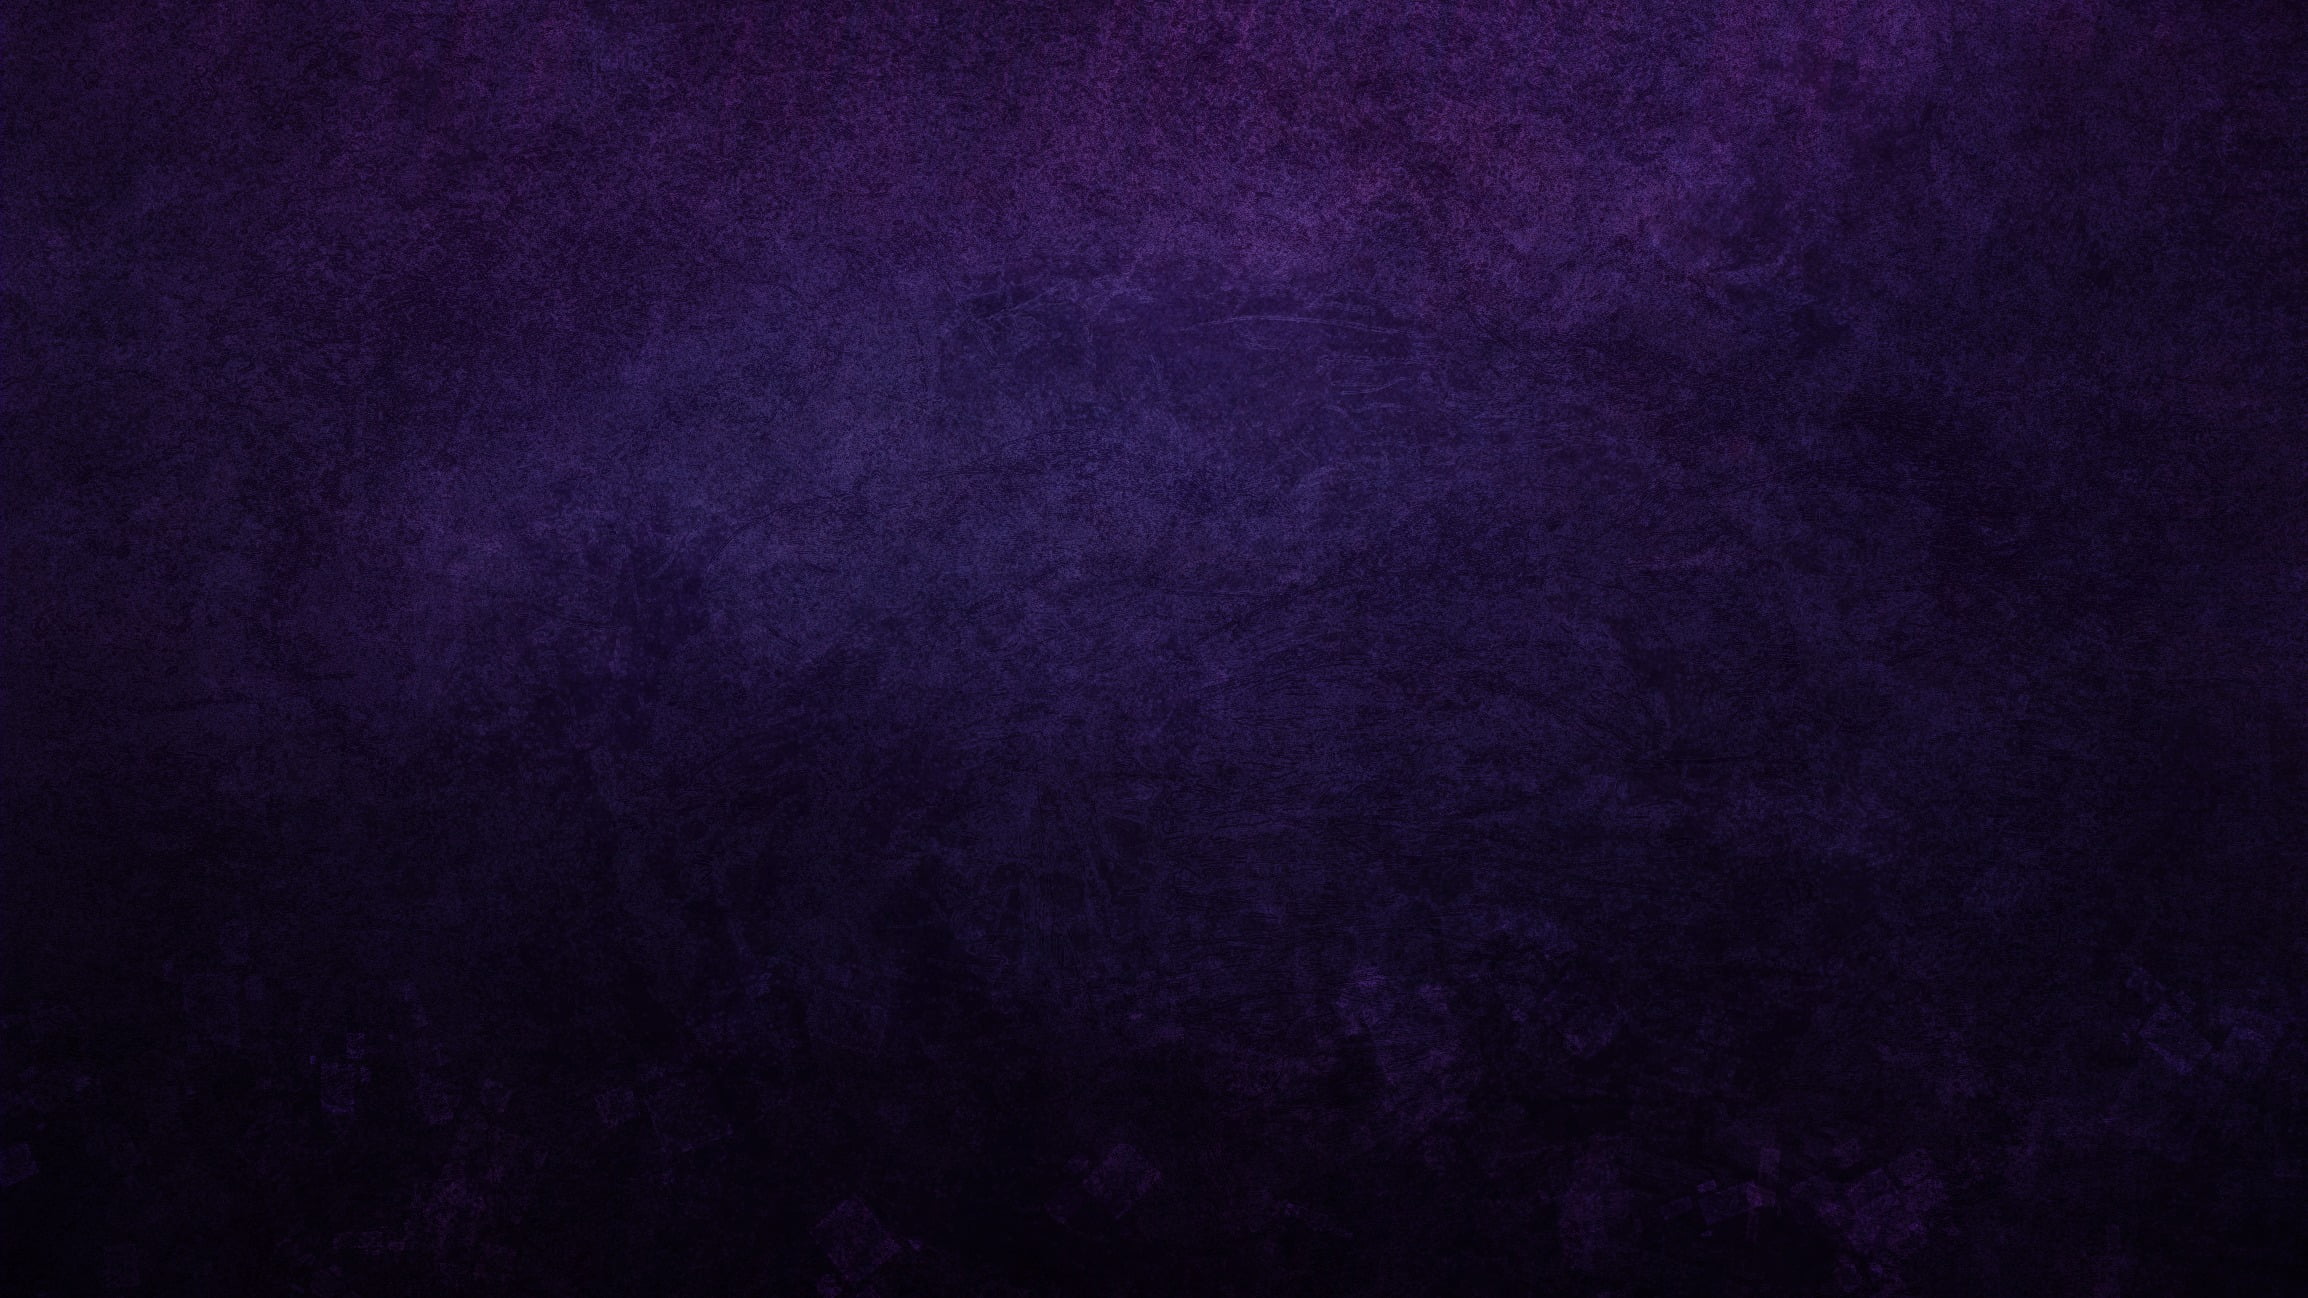 purple background, texture, backgrounds, abstract, textured, dark